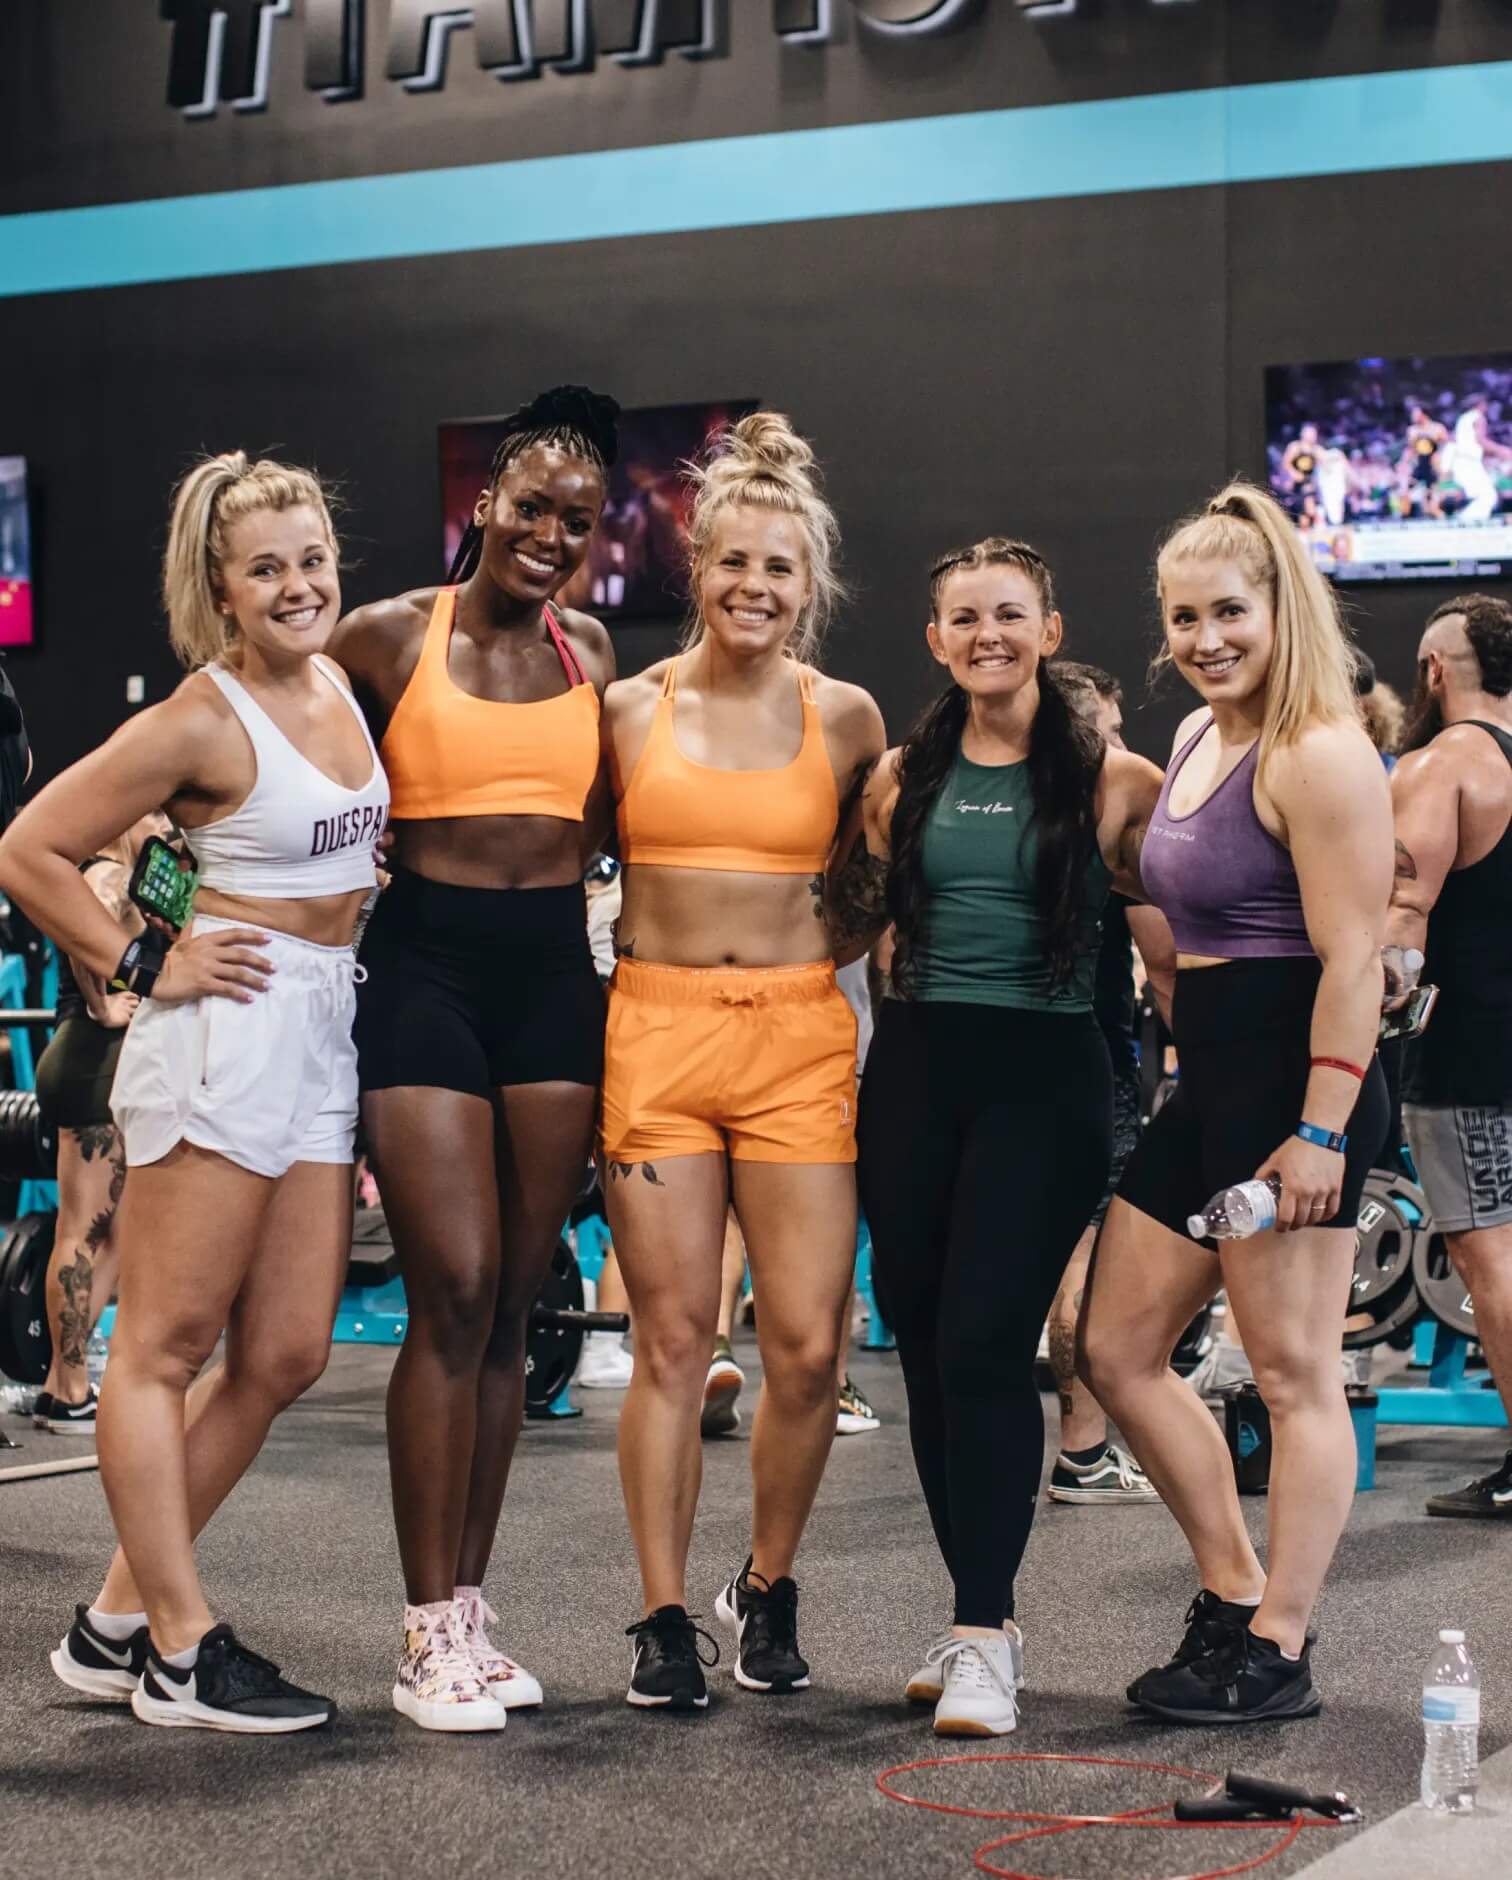 Group of Girls in Gym